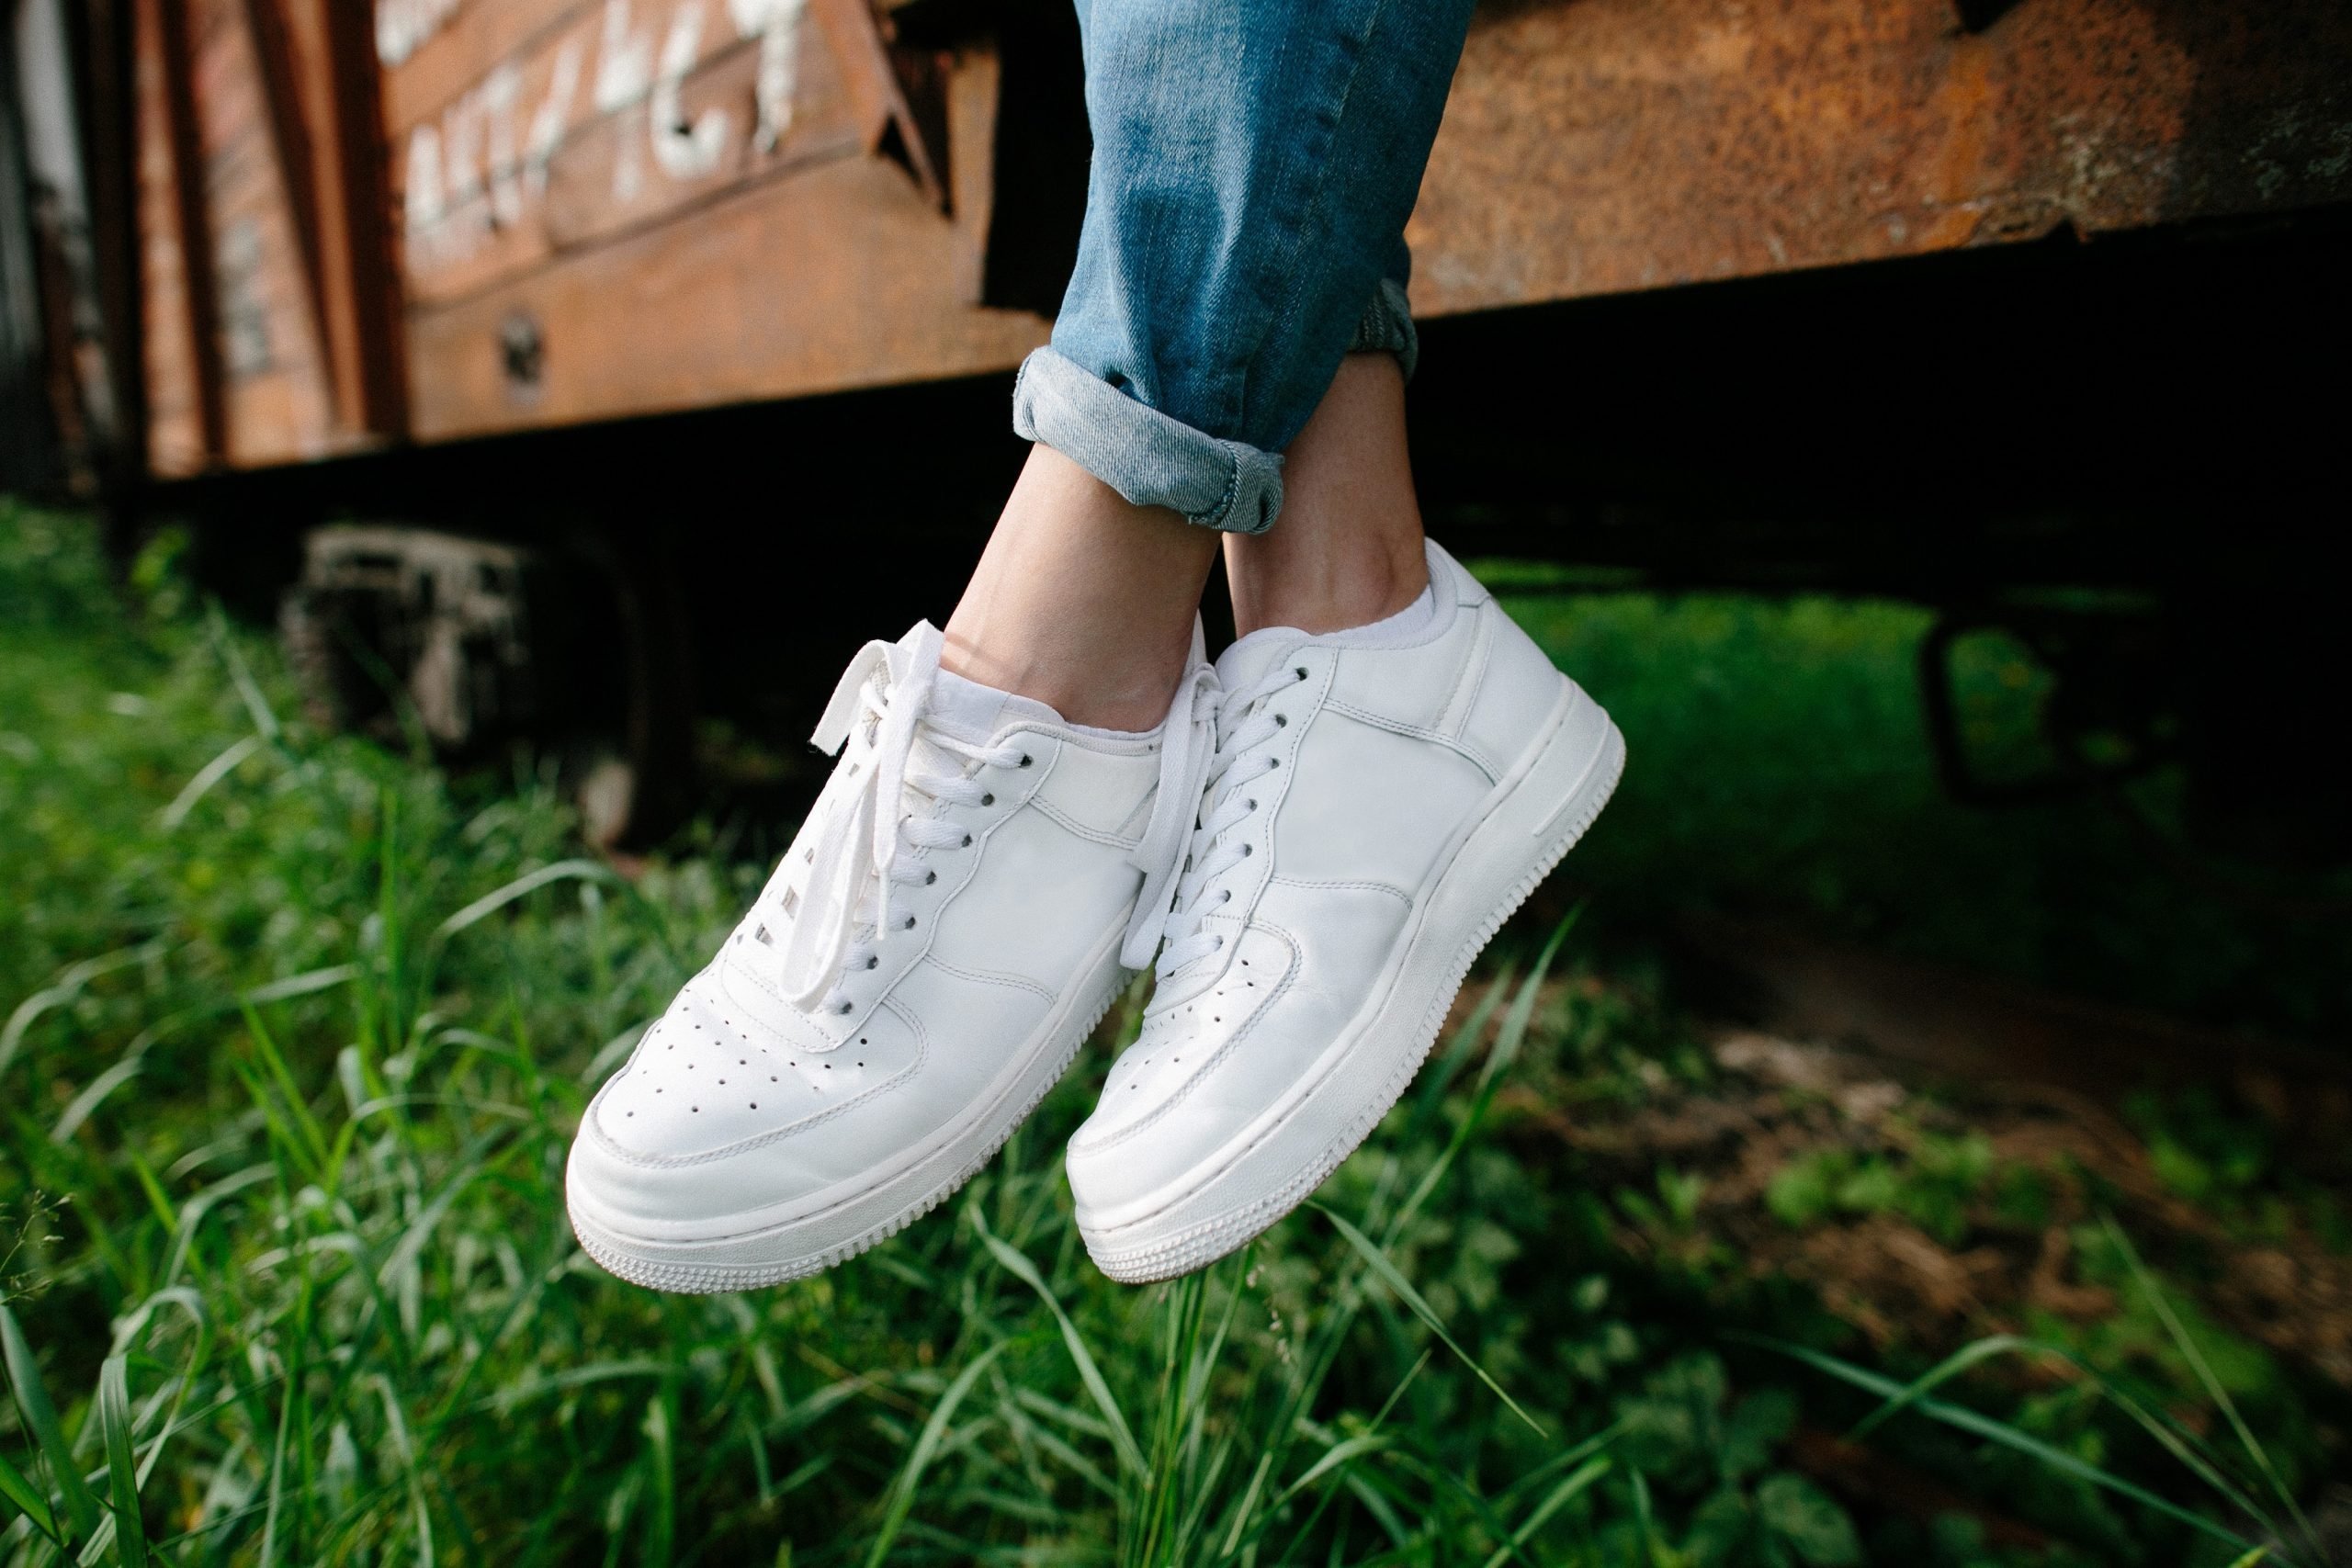 This Is How Clean White Sneakers | Reader's Digest